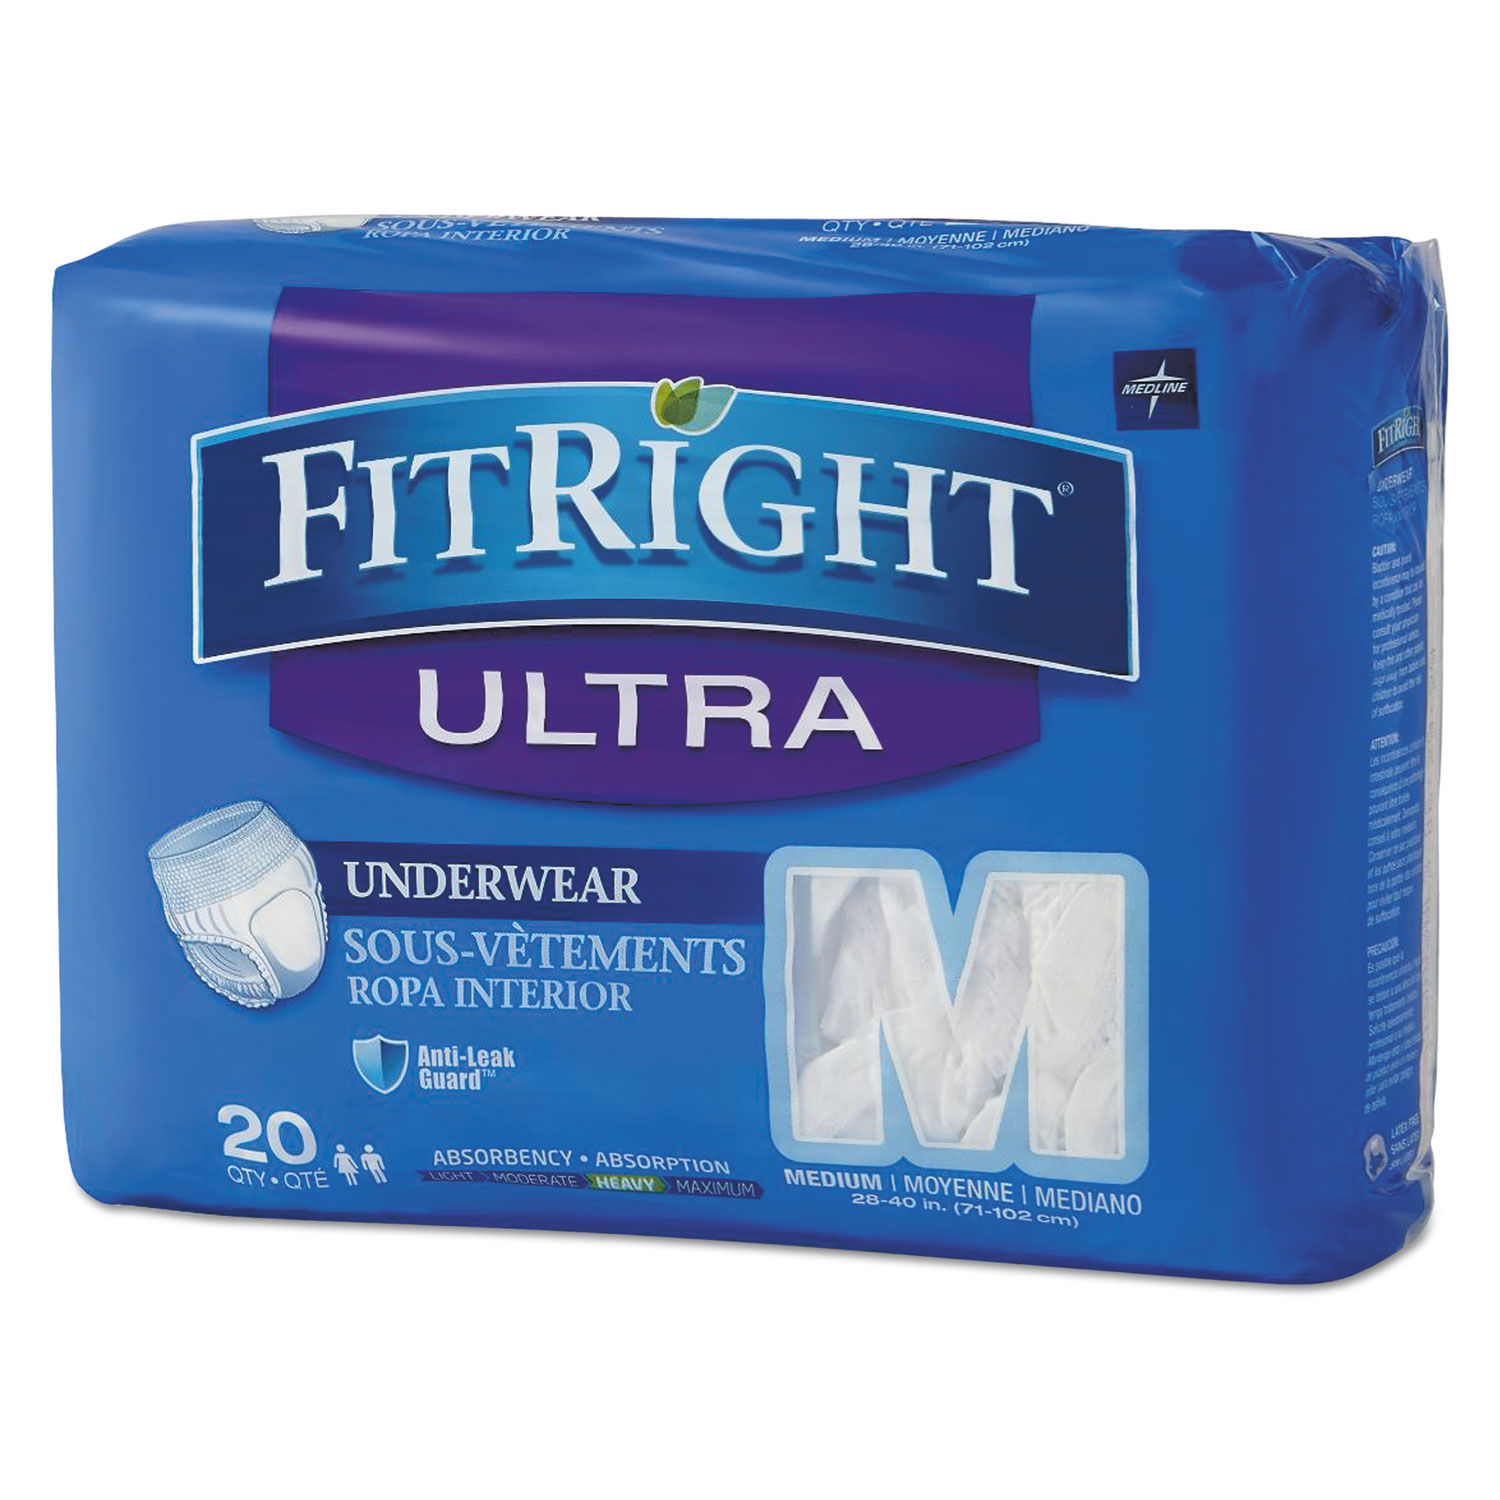 FitRight Ultra Protective Underwear Medium, 28" to 40" Waist, 20/Pack, 4 Pack/Carton